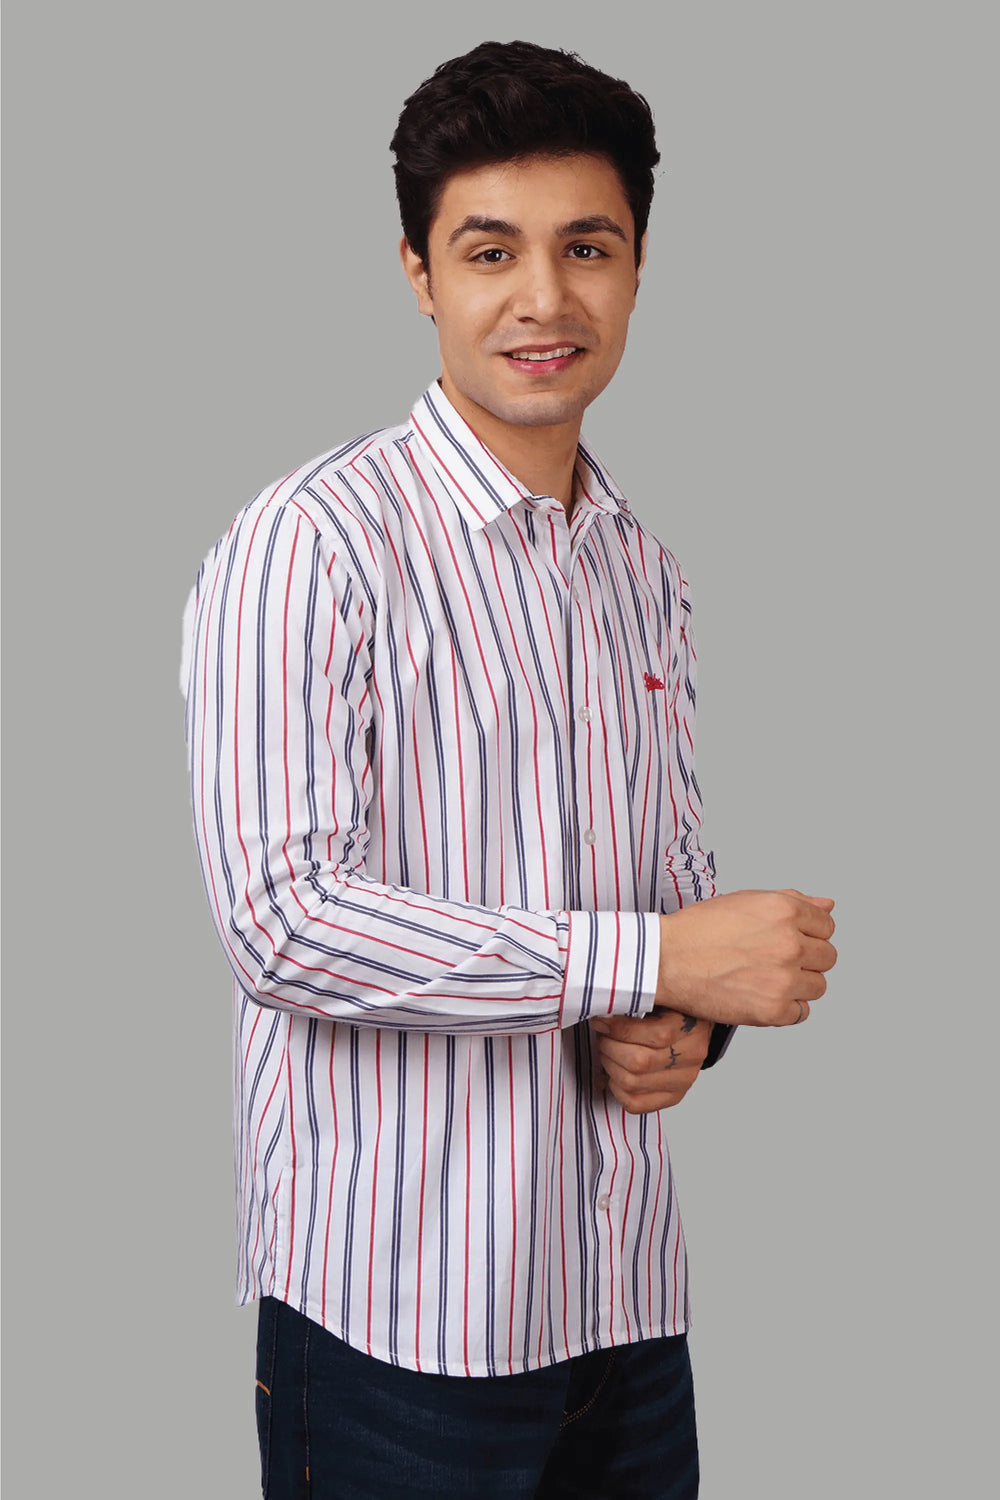 Best party wear shirt in mens fashion . And it's conmfortable and perfect look in reasonable price.